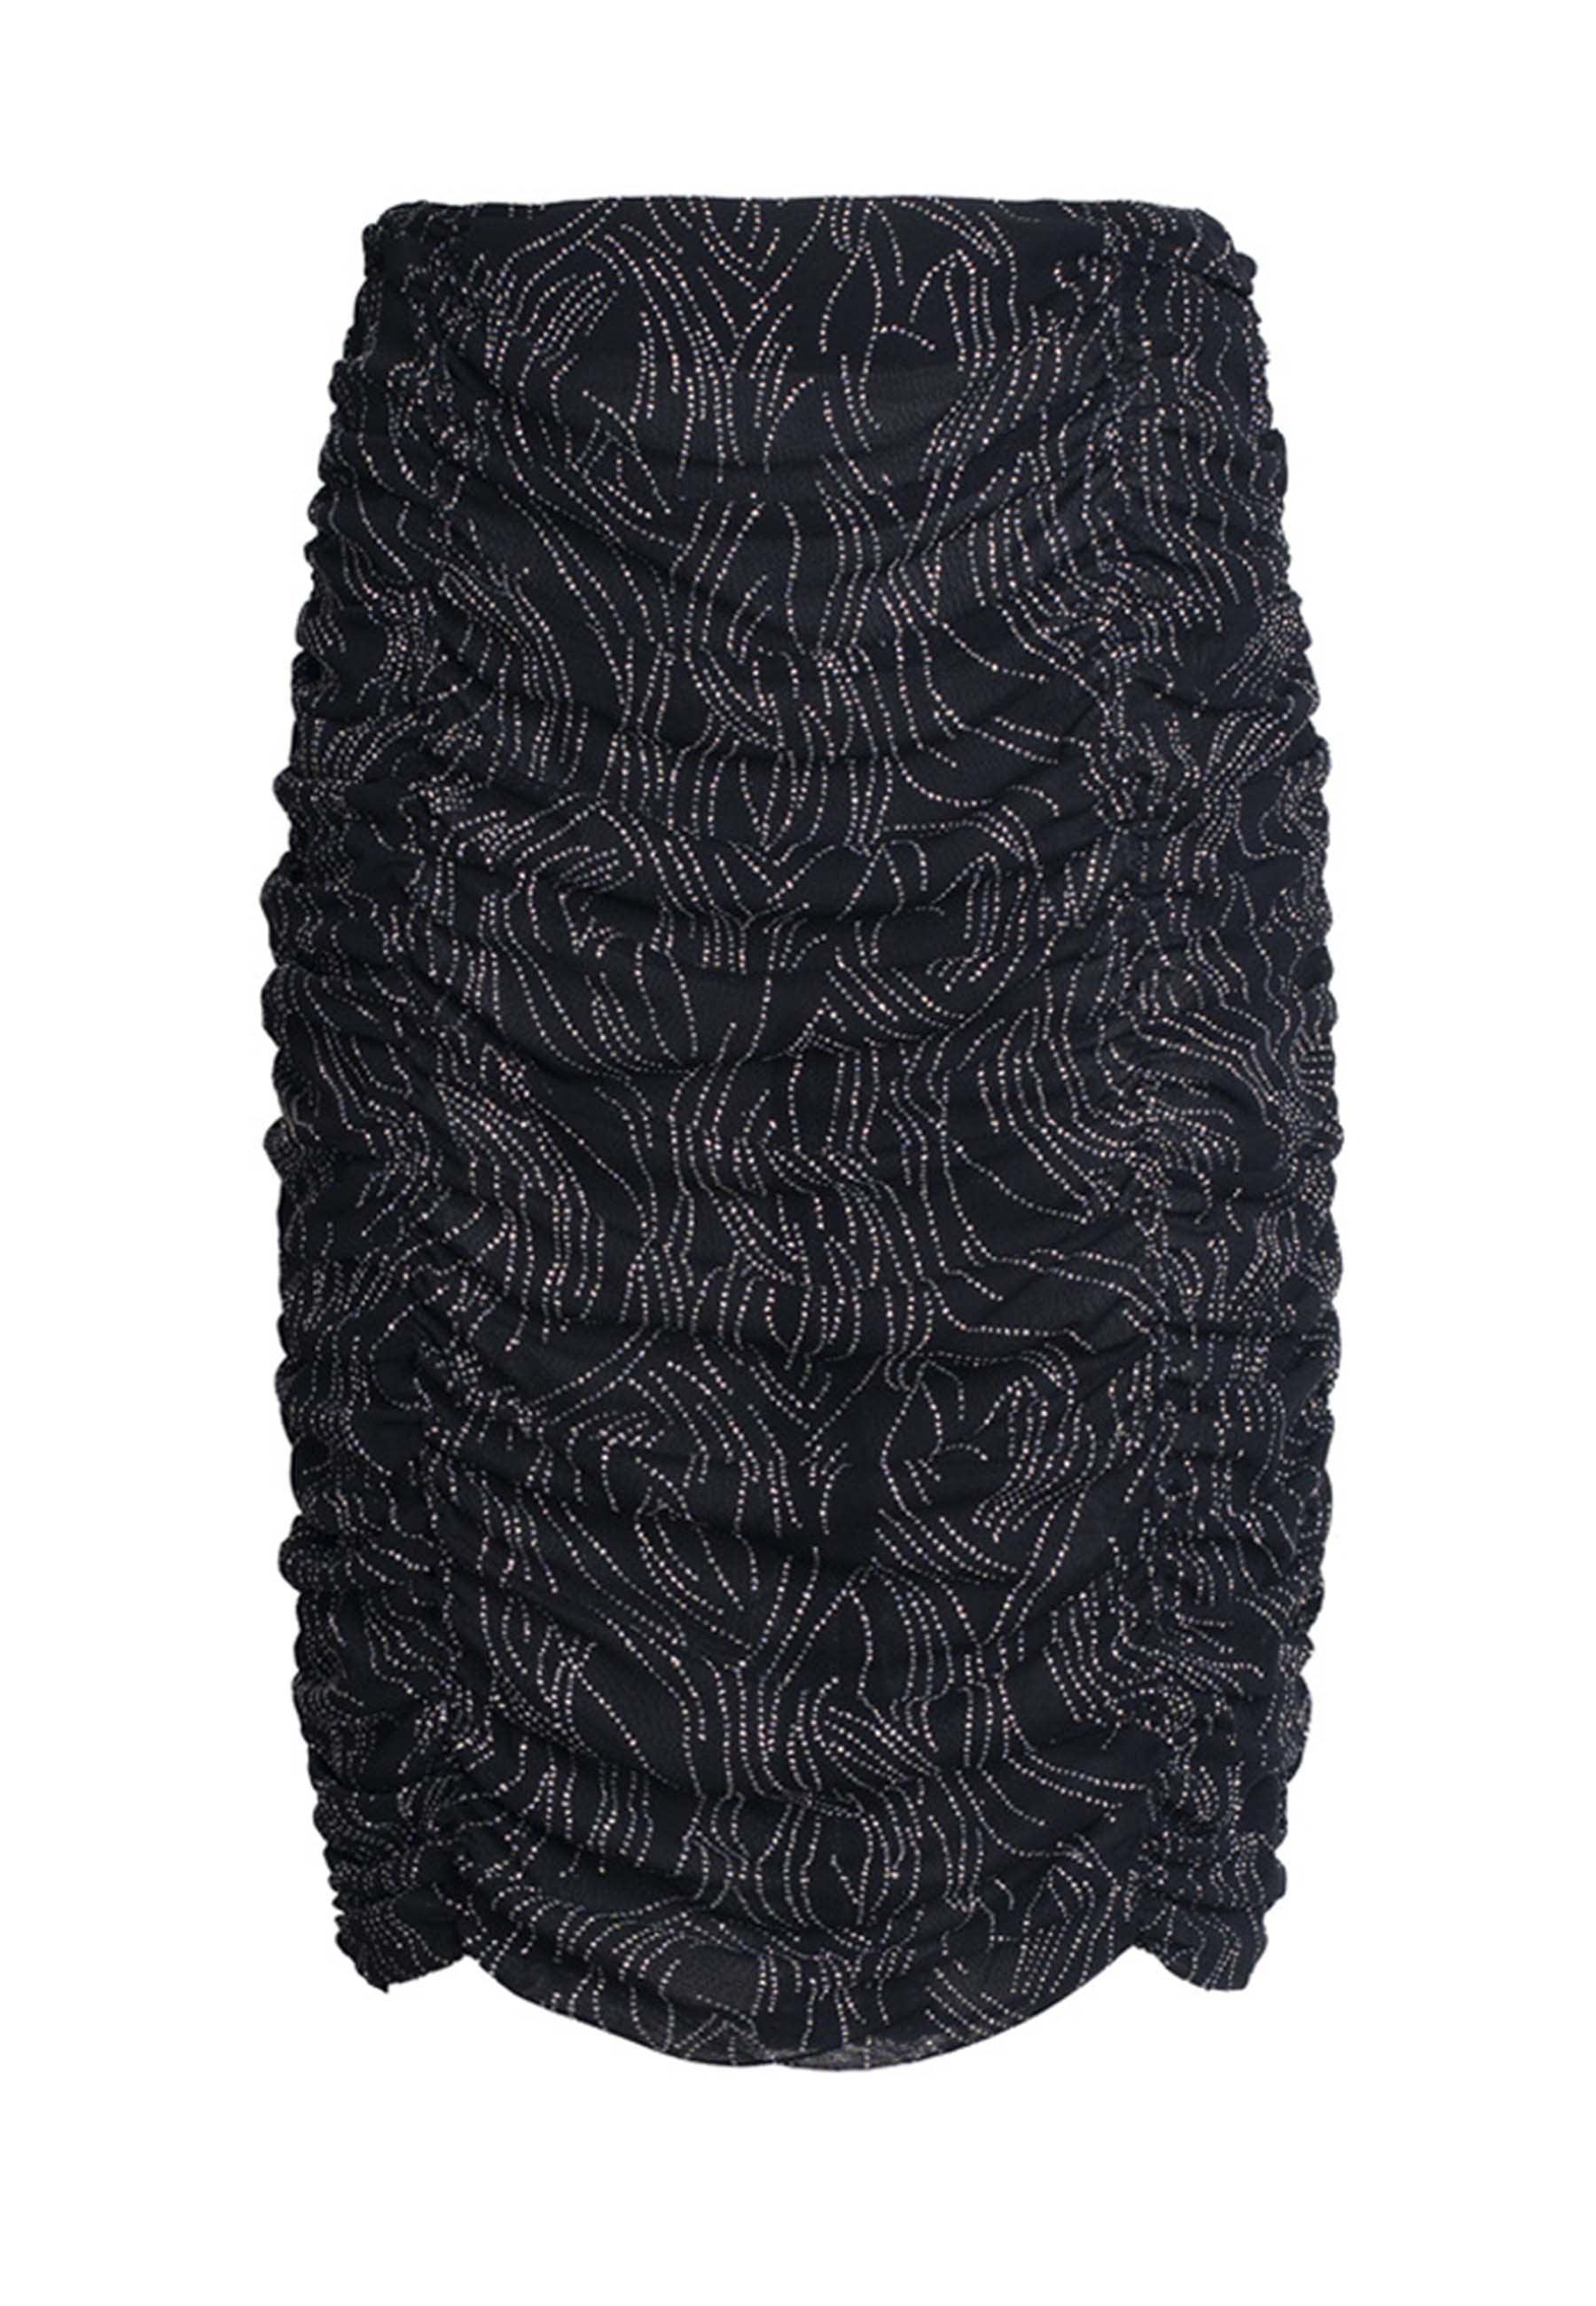 Women's long skirt in transparent black sequined fabric